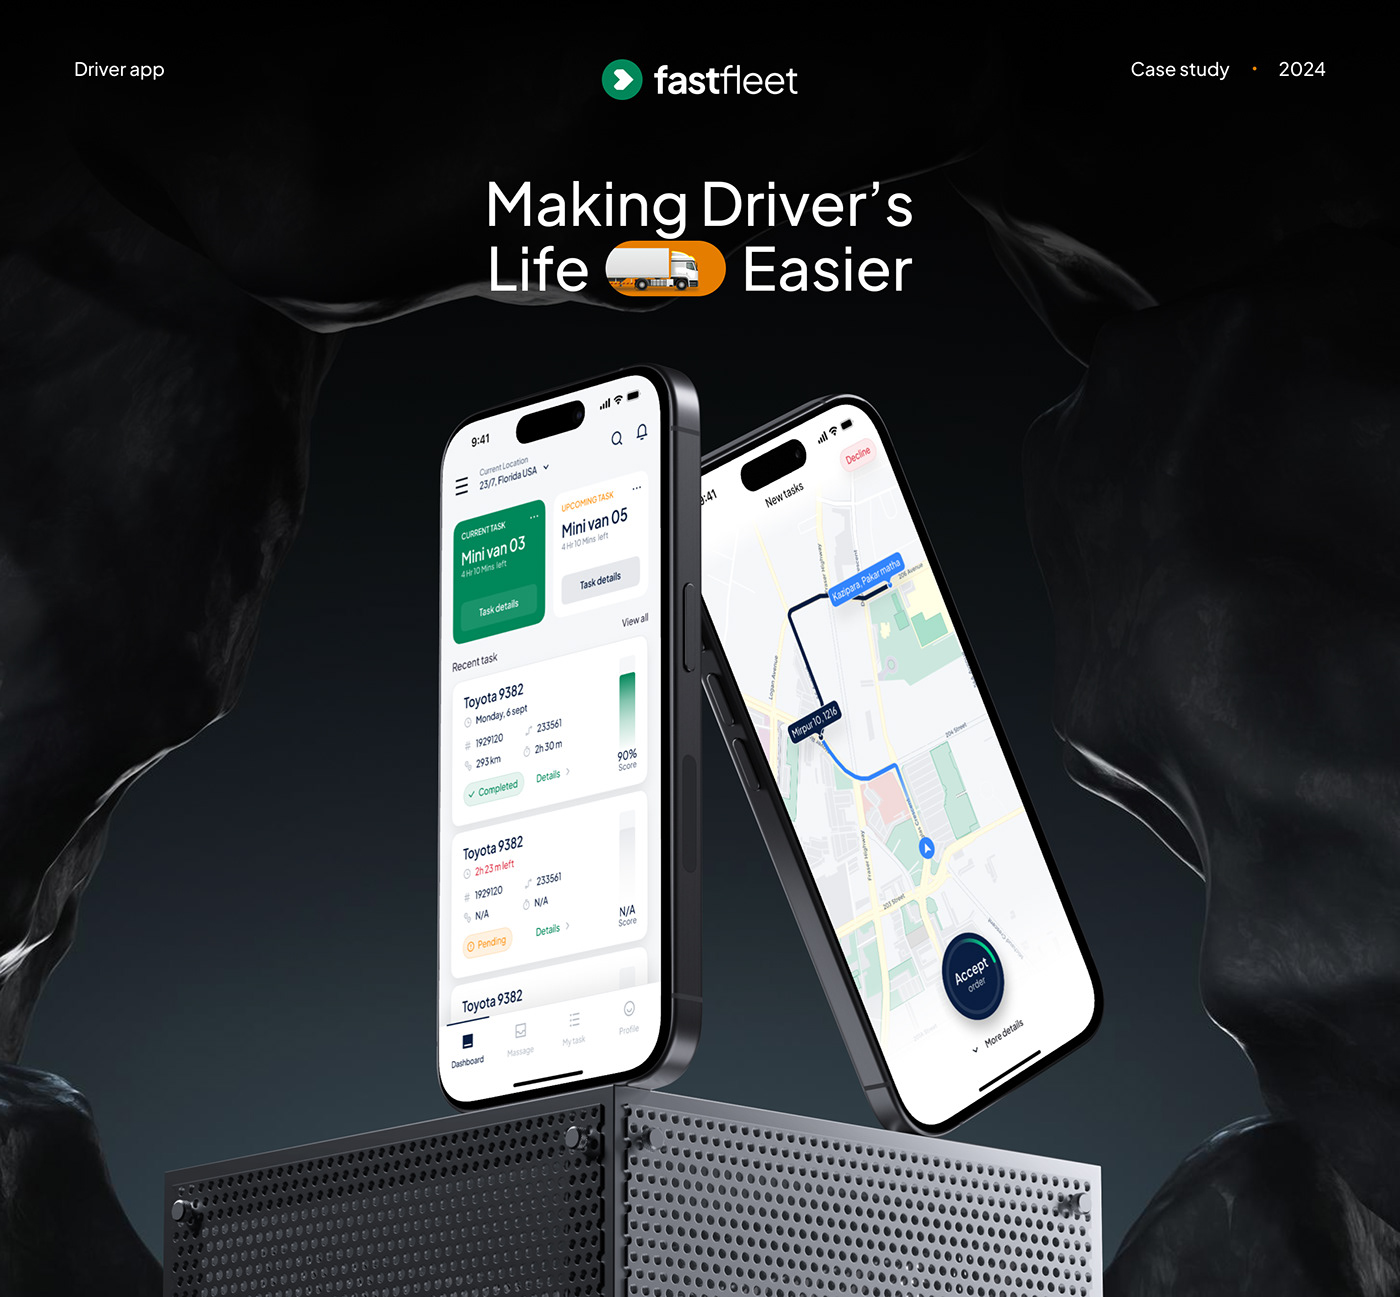 Thumbnail of fleet management driver app with iPhone mockup on steel box and black background 